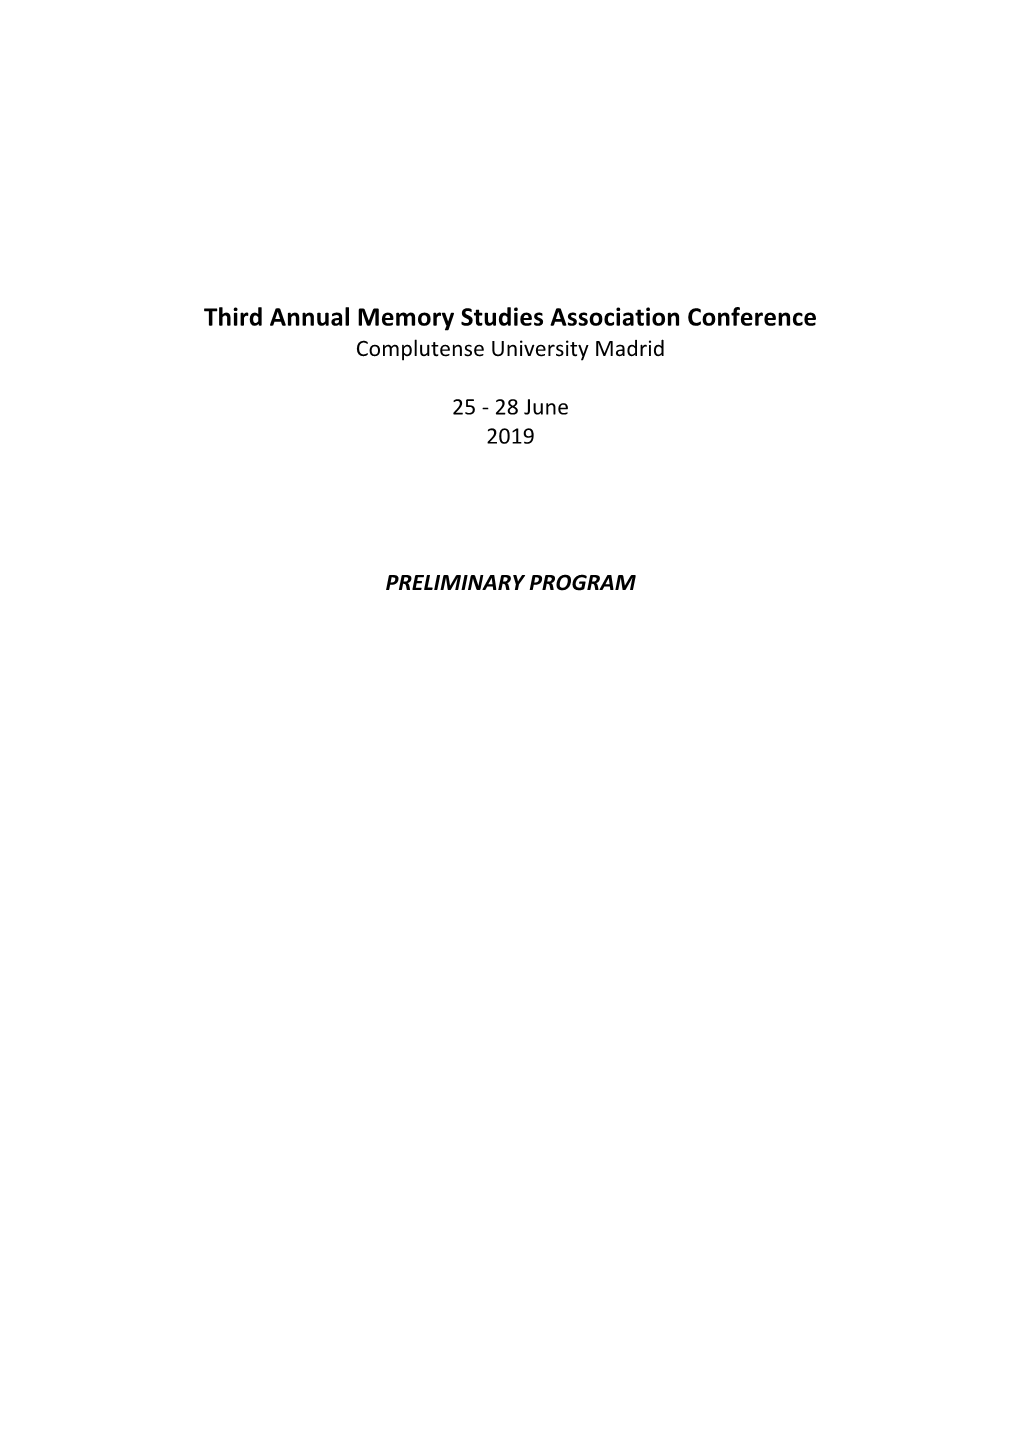 Third Annual Memory Studies Association Conference Complutense University Madrid